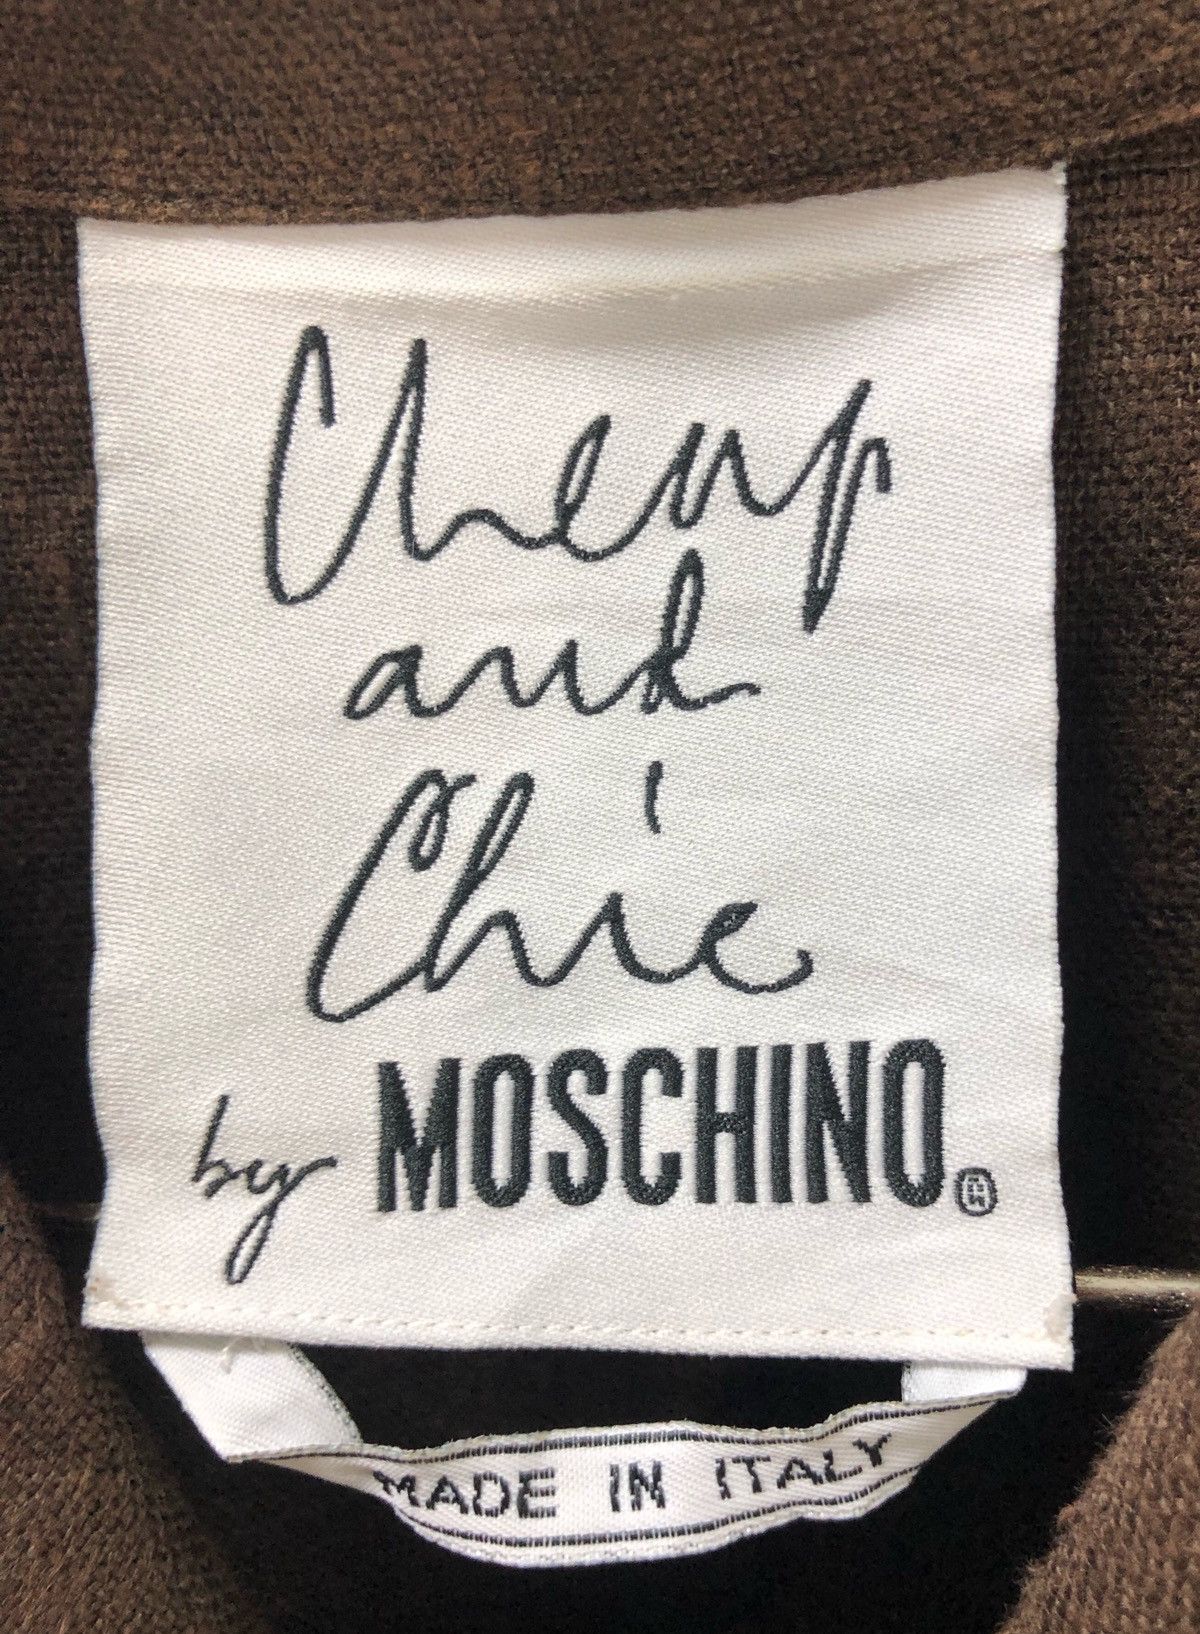 Moschino Cheap and Chic by Moschino Size US S / EU 44-46 / 1 - 9 Thumbnail